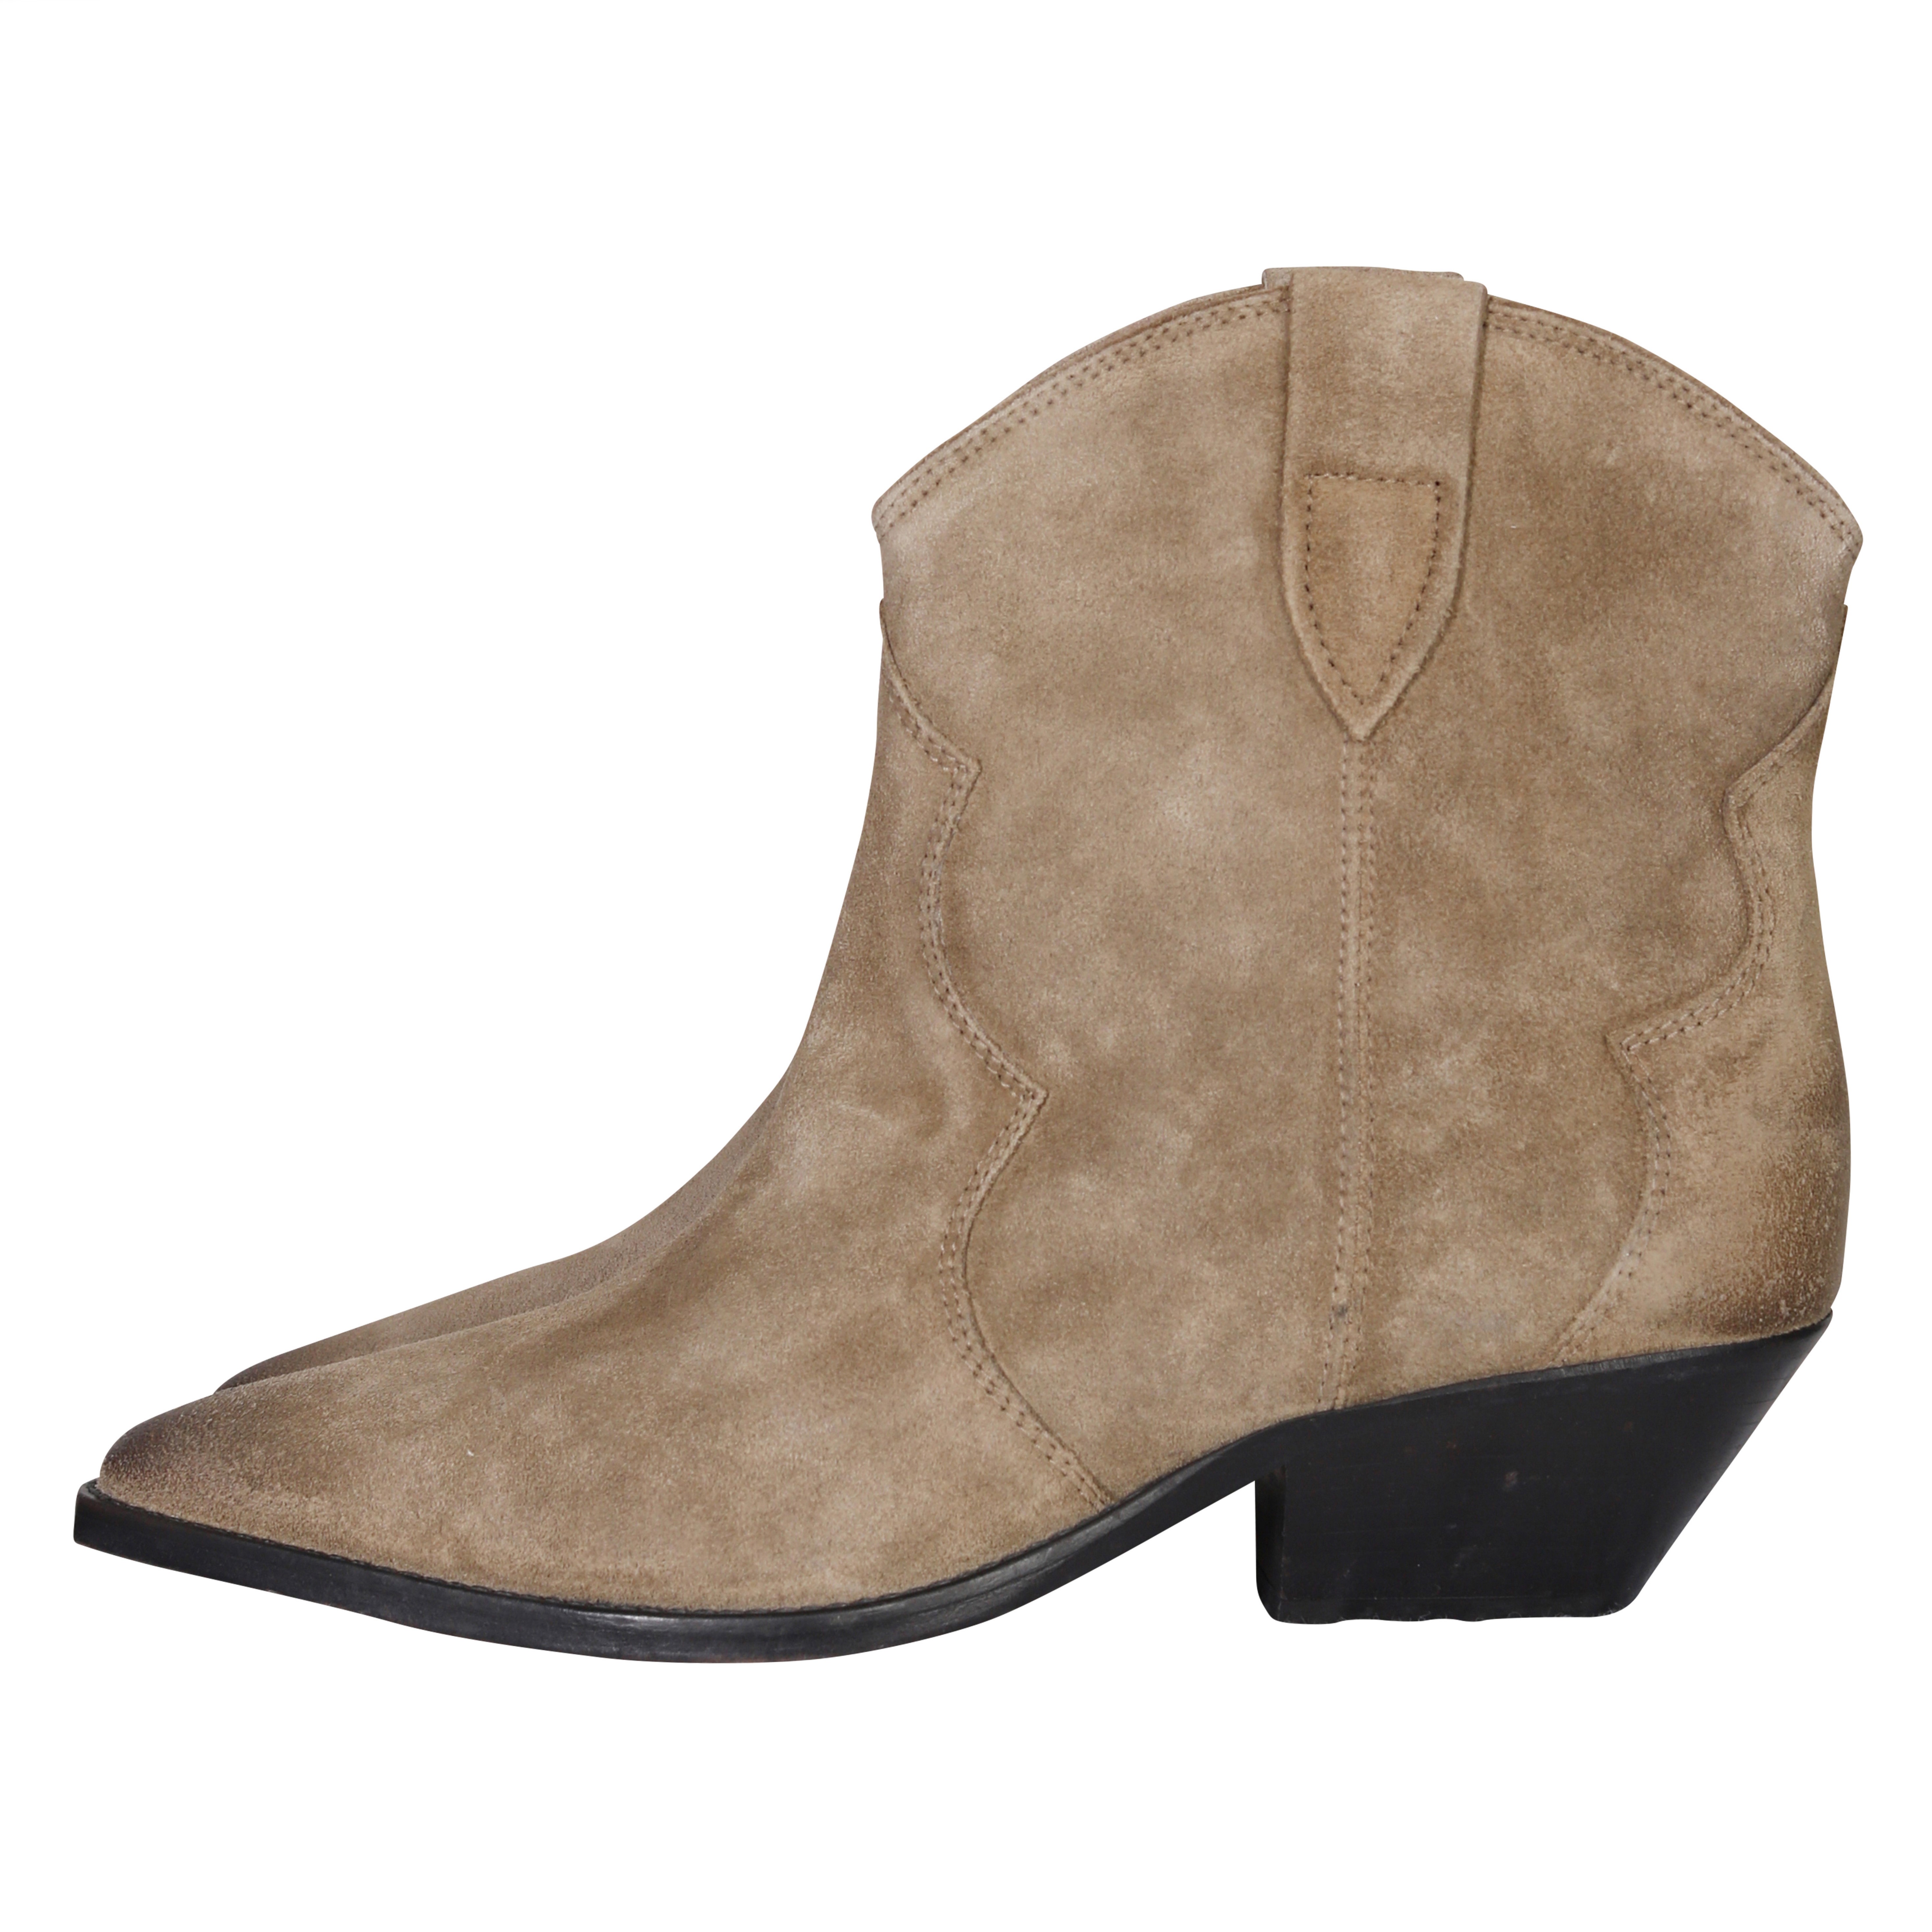 Isabel Marant Dewina Boots in Taupe 41